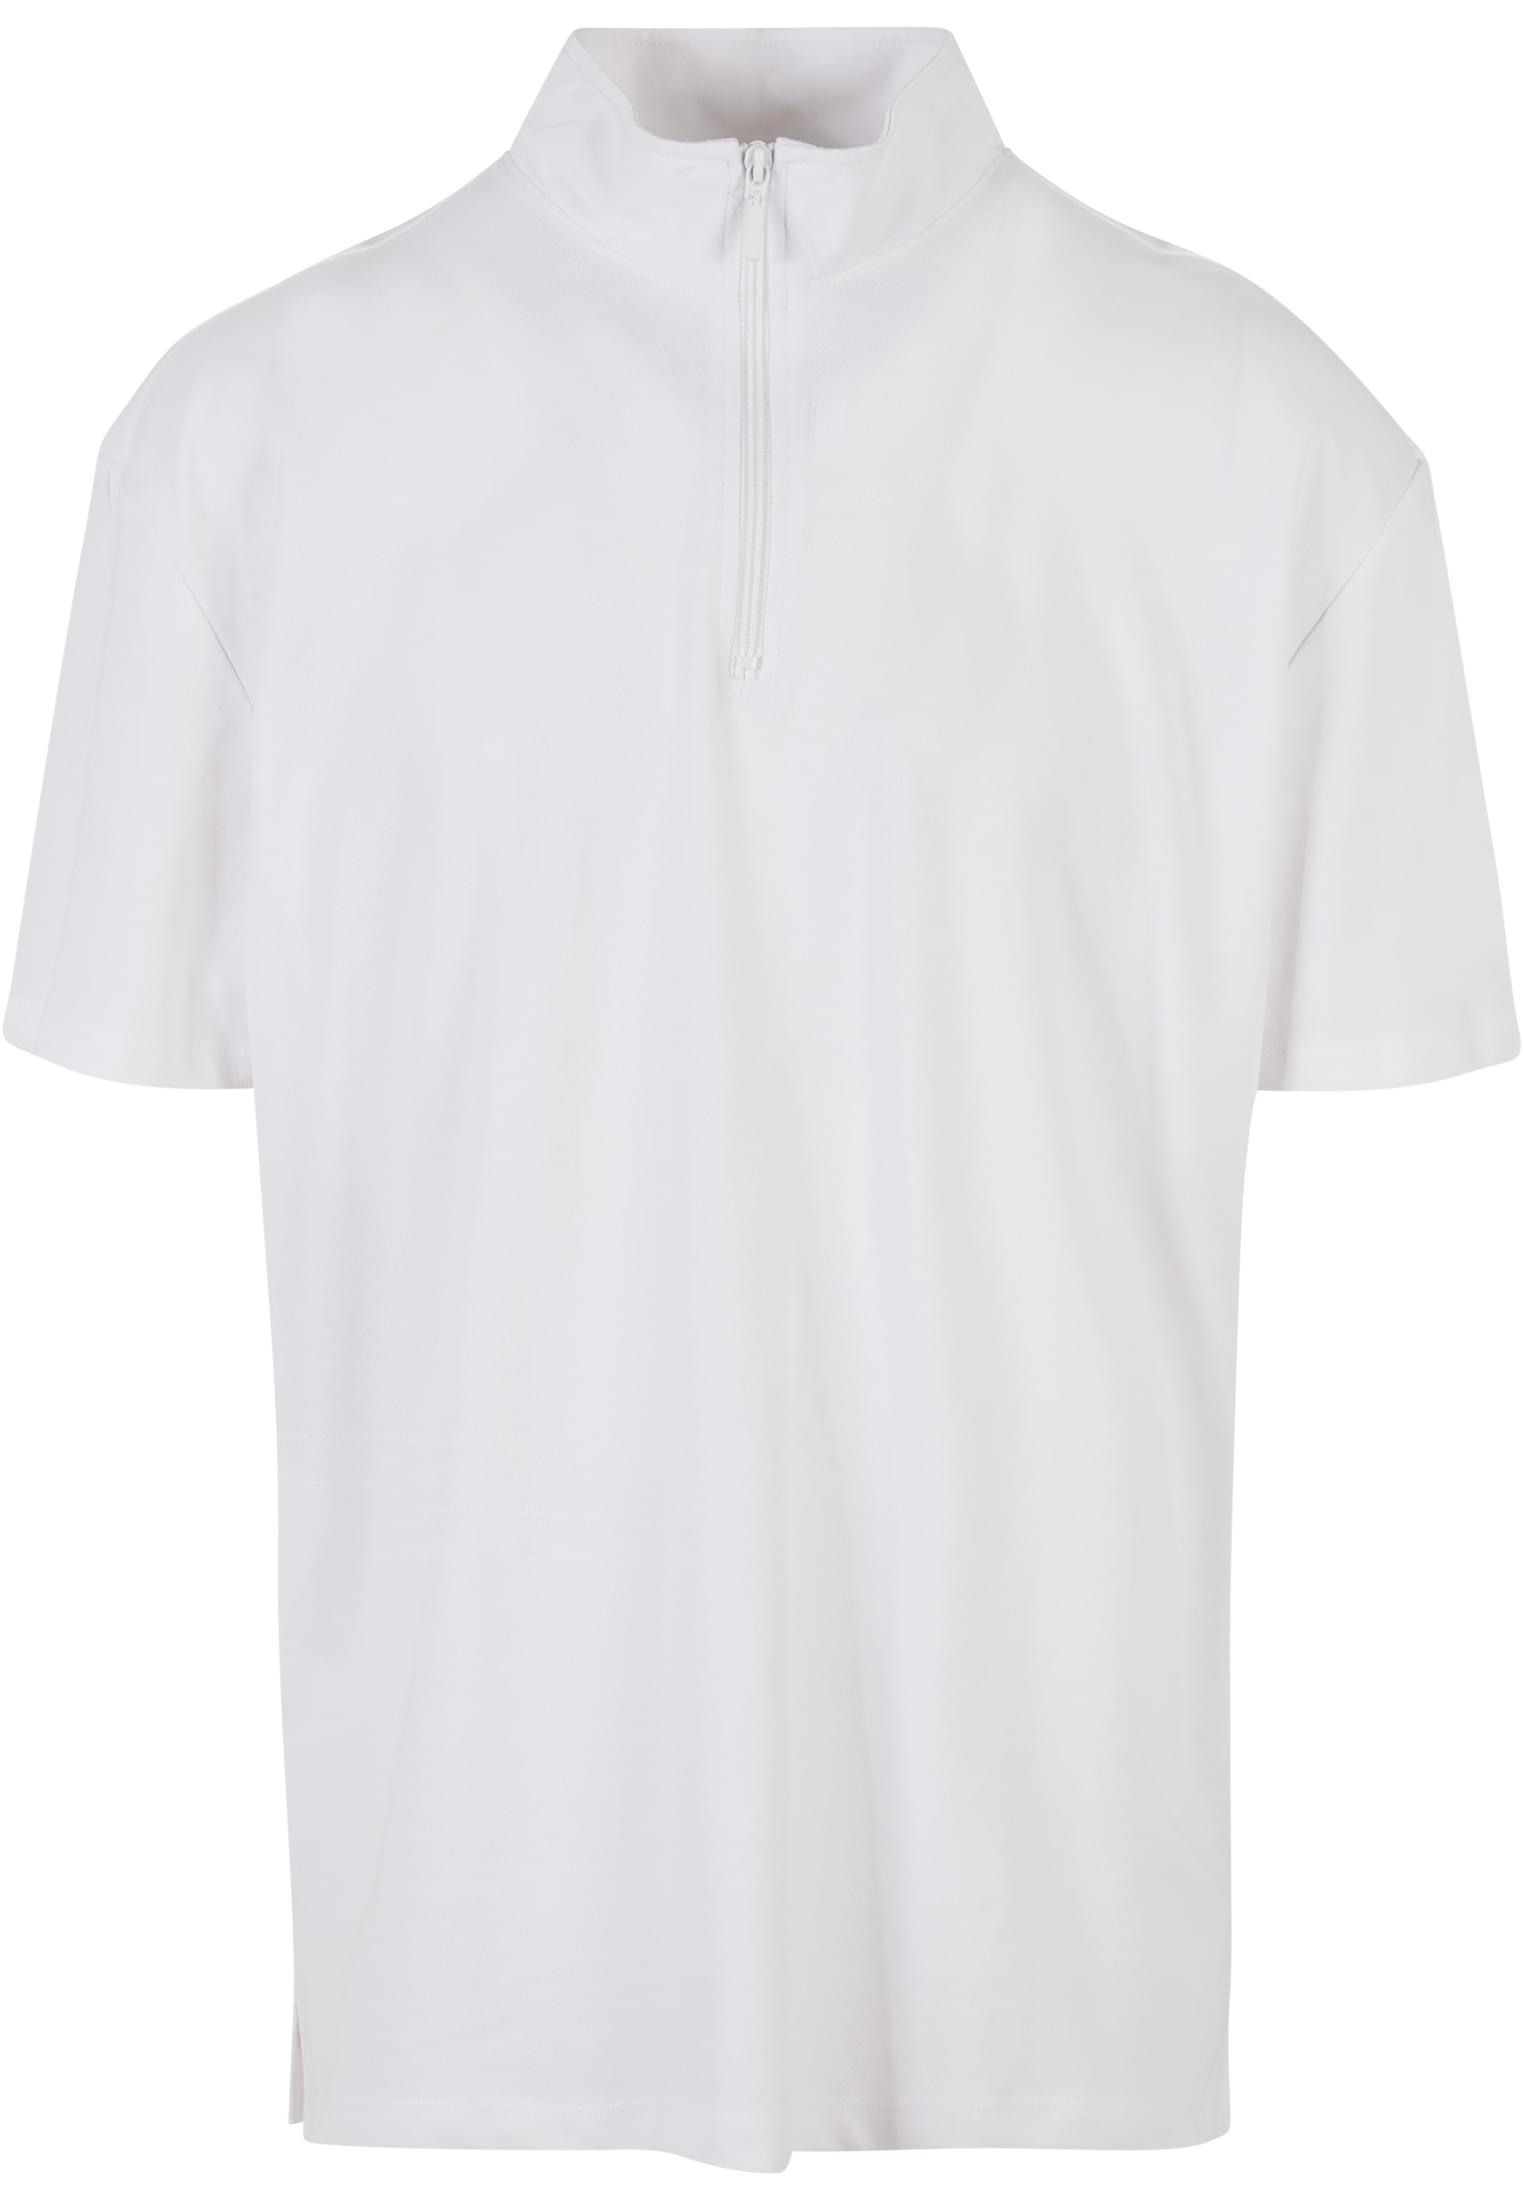 T-Shirts Boxy Zip Pique Tee in Farbe white